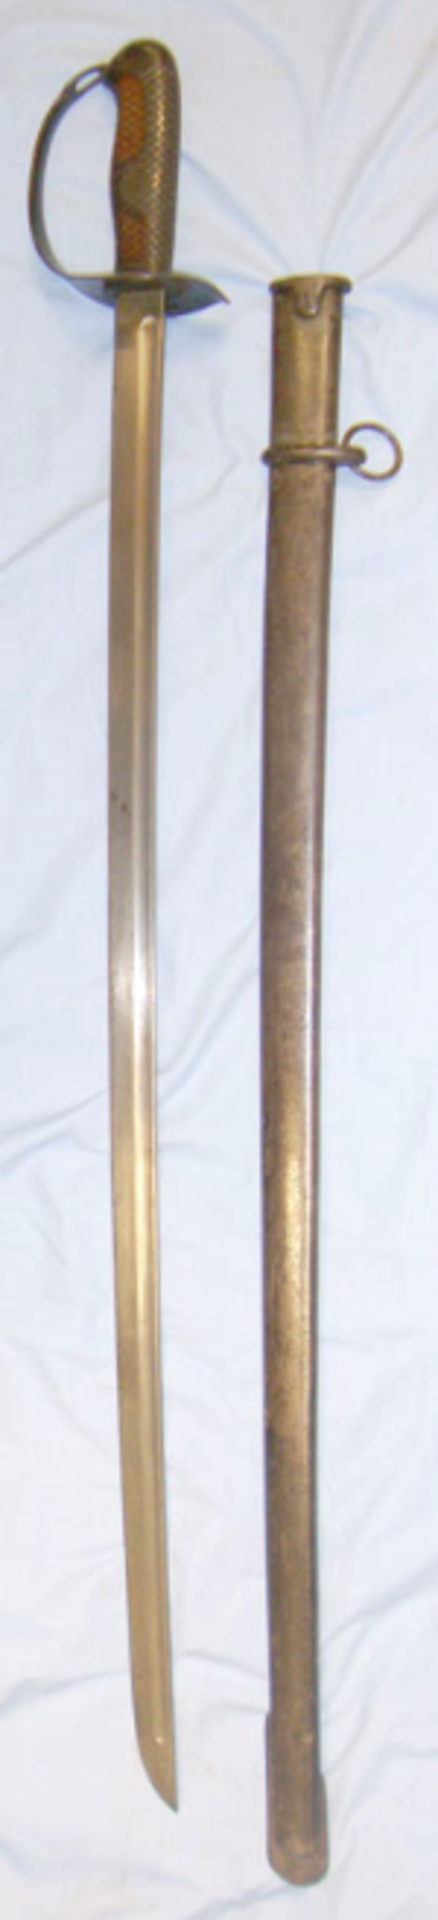 WW2 Japanese Cavalry Trooper's / Mounted Police Sword & Scabbard. - Image 2 of 3